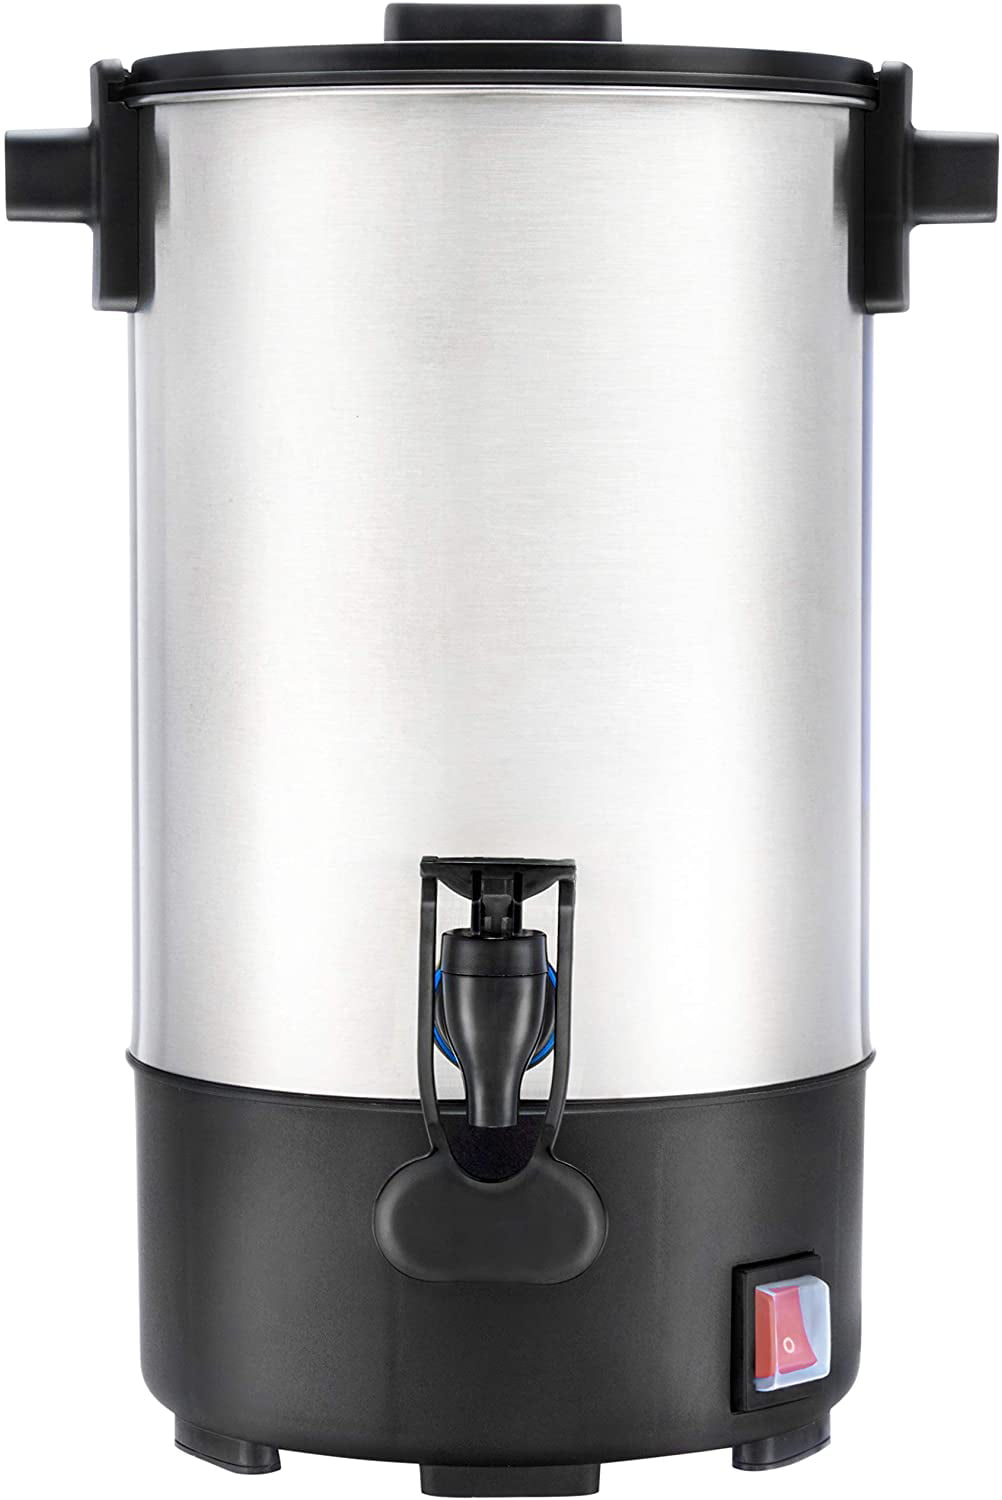 Ideal for Home Brewing Commercial or Office Use CHARON 20 Litre Capacity Stainless Steel Commercial Catering Urn Hot Water Boiler & Dispenser 